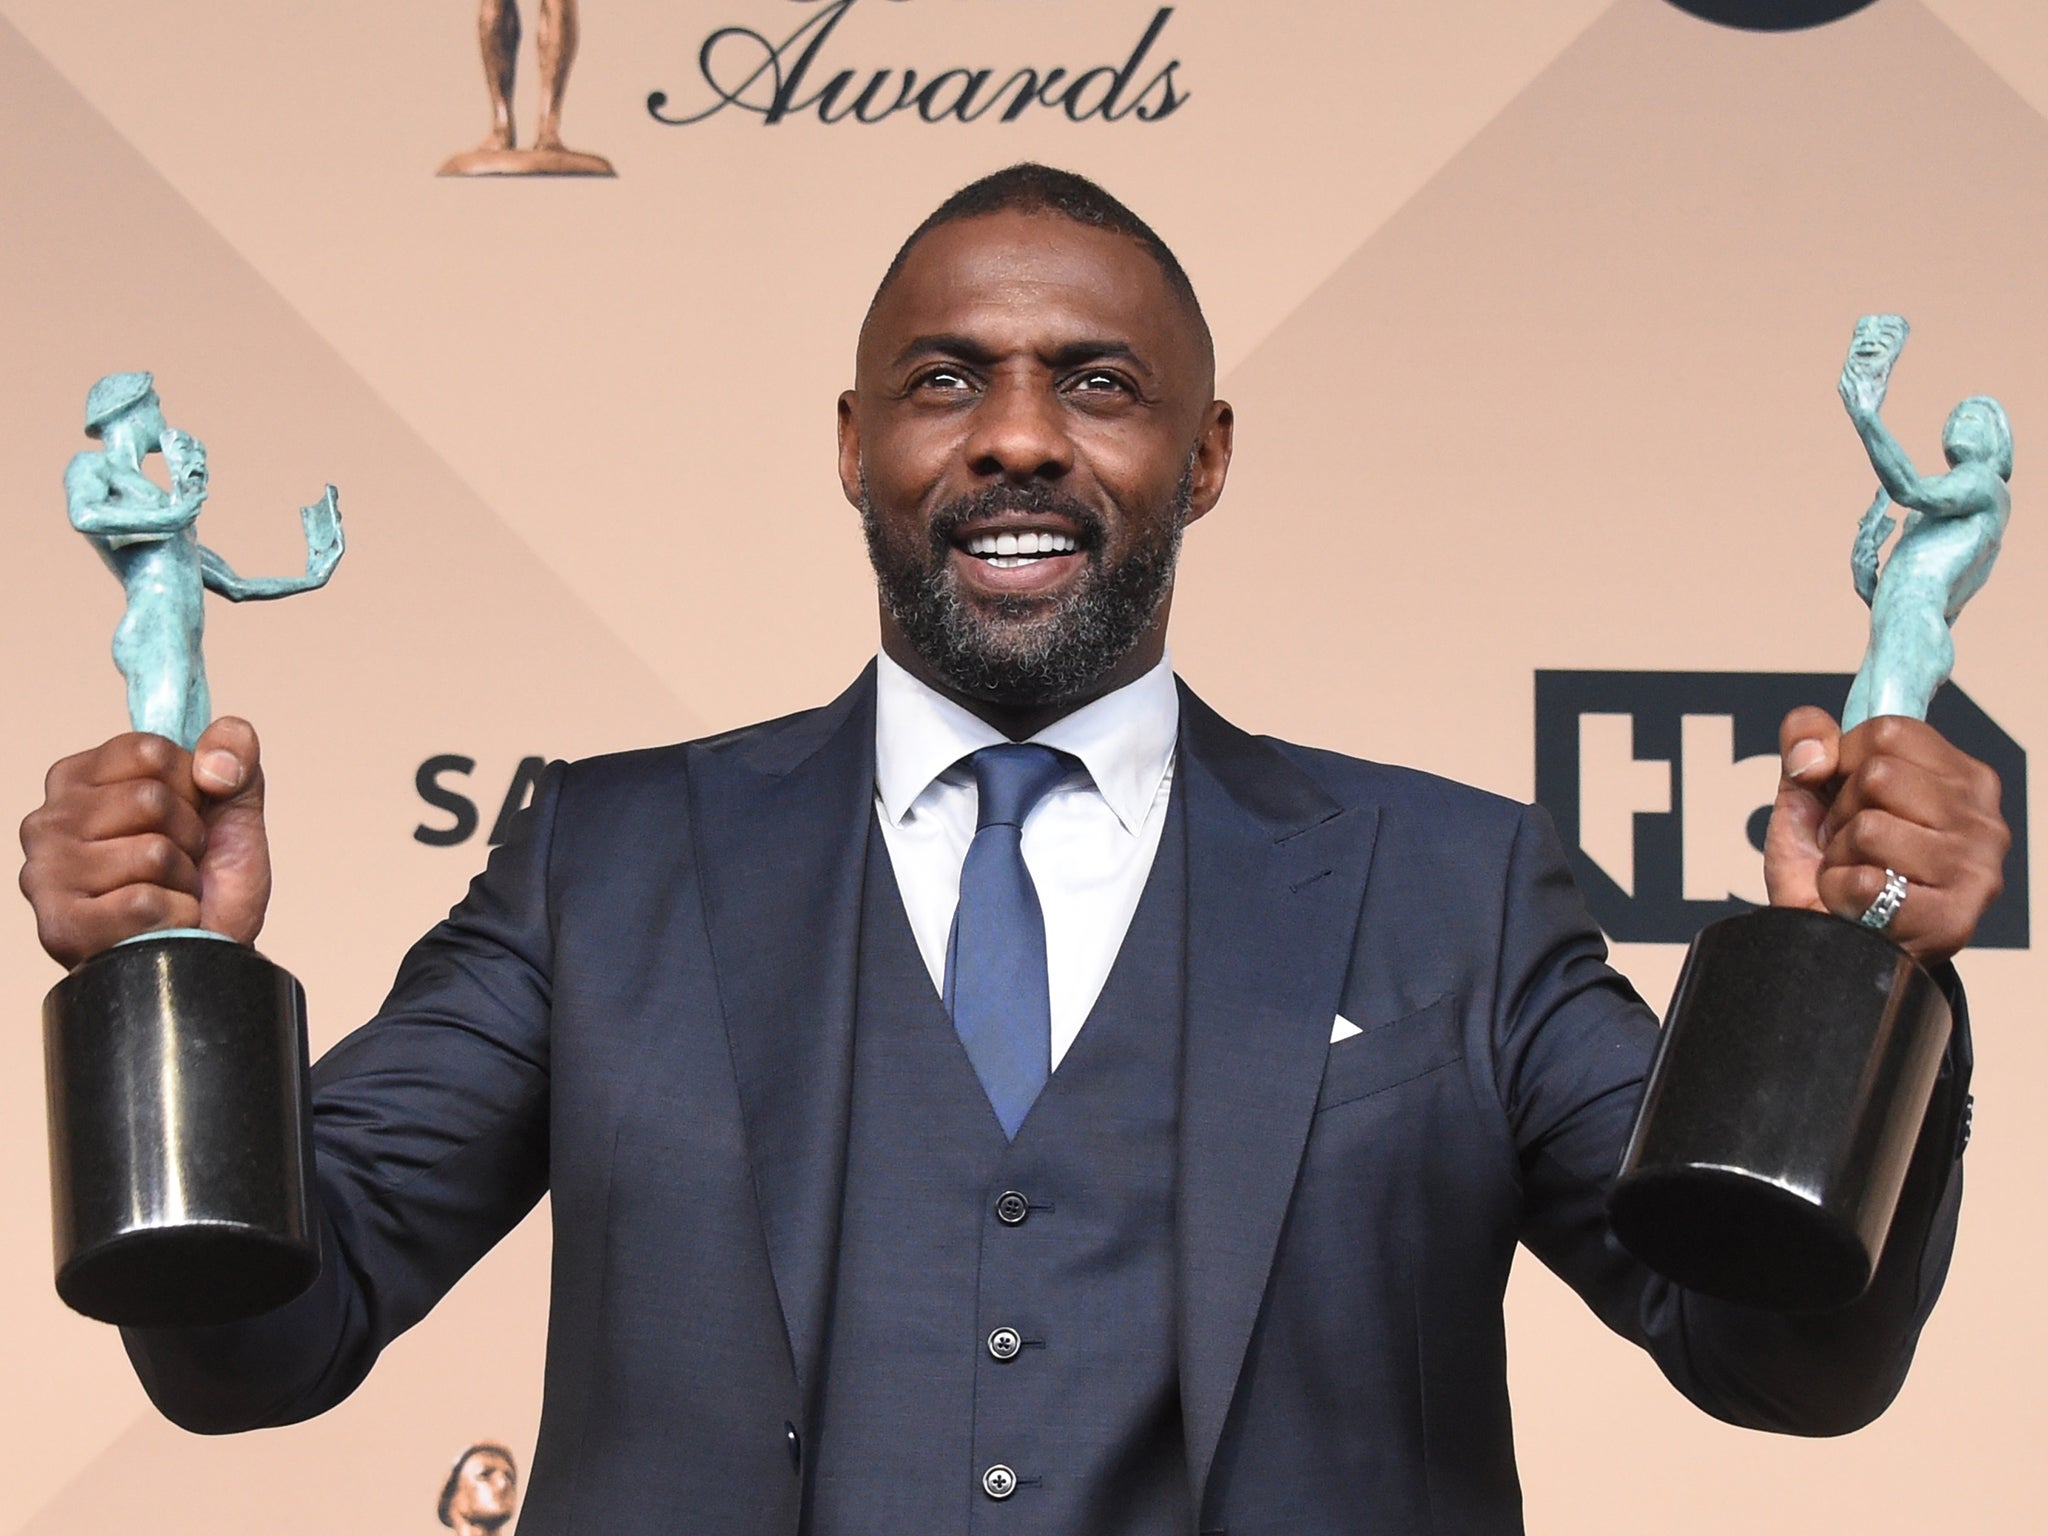 To my mind, the most natural living, breathing Bond would be Idris Elba